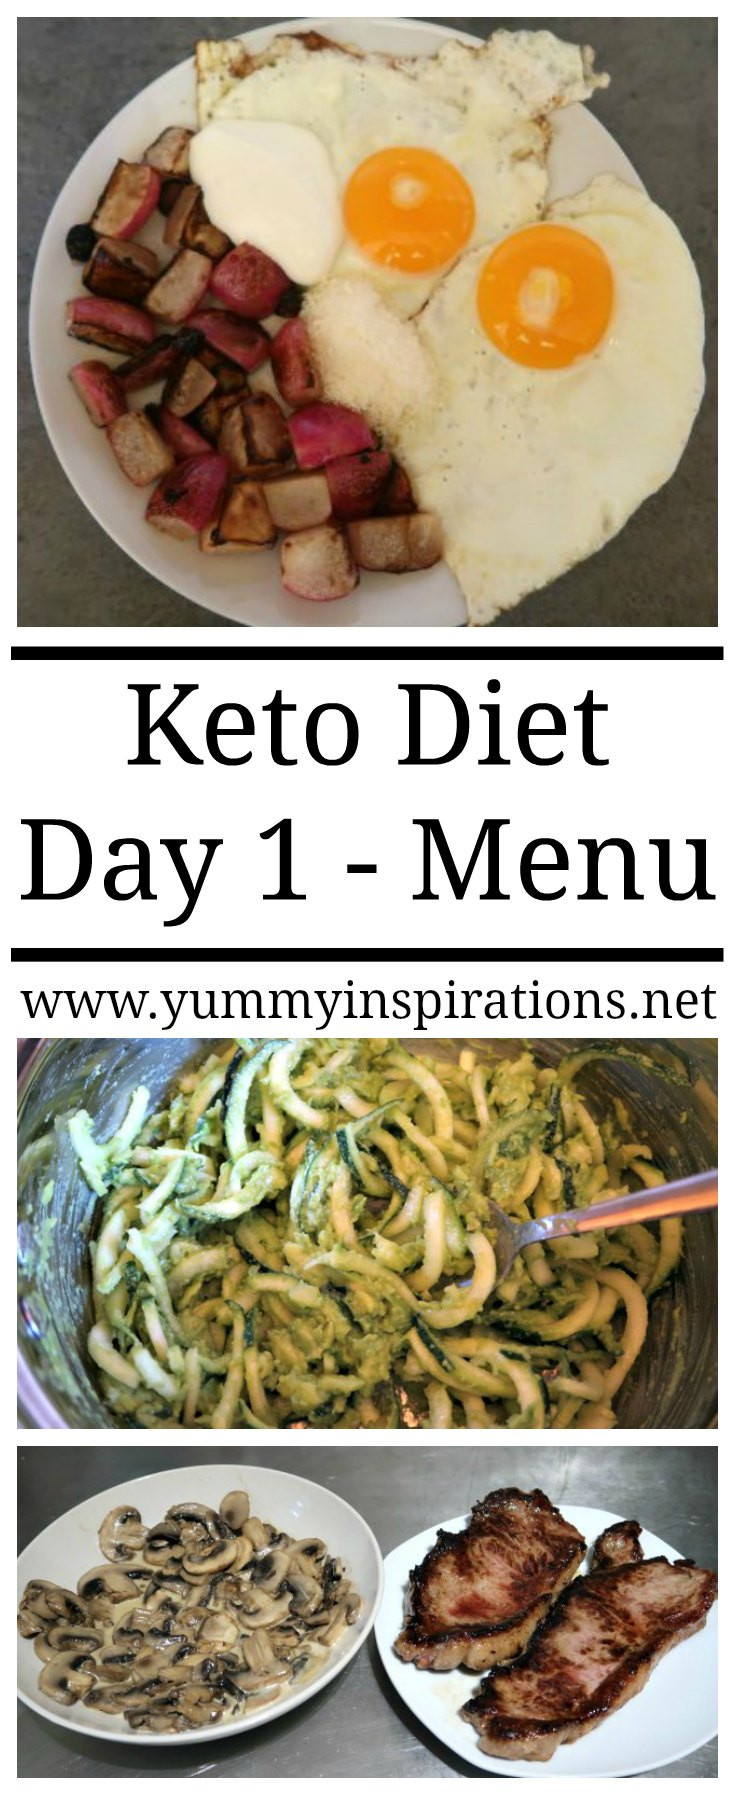 Meals For Keto Diet
 Keto Day 1 Meal Plan Menu & Video Diary Day e